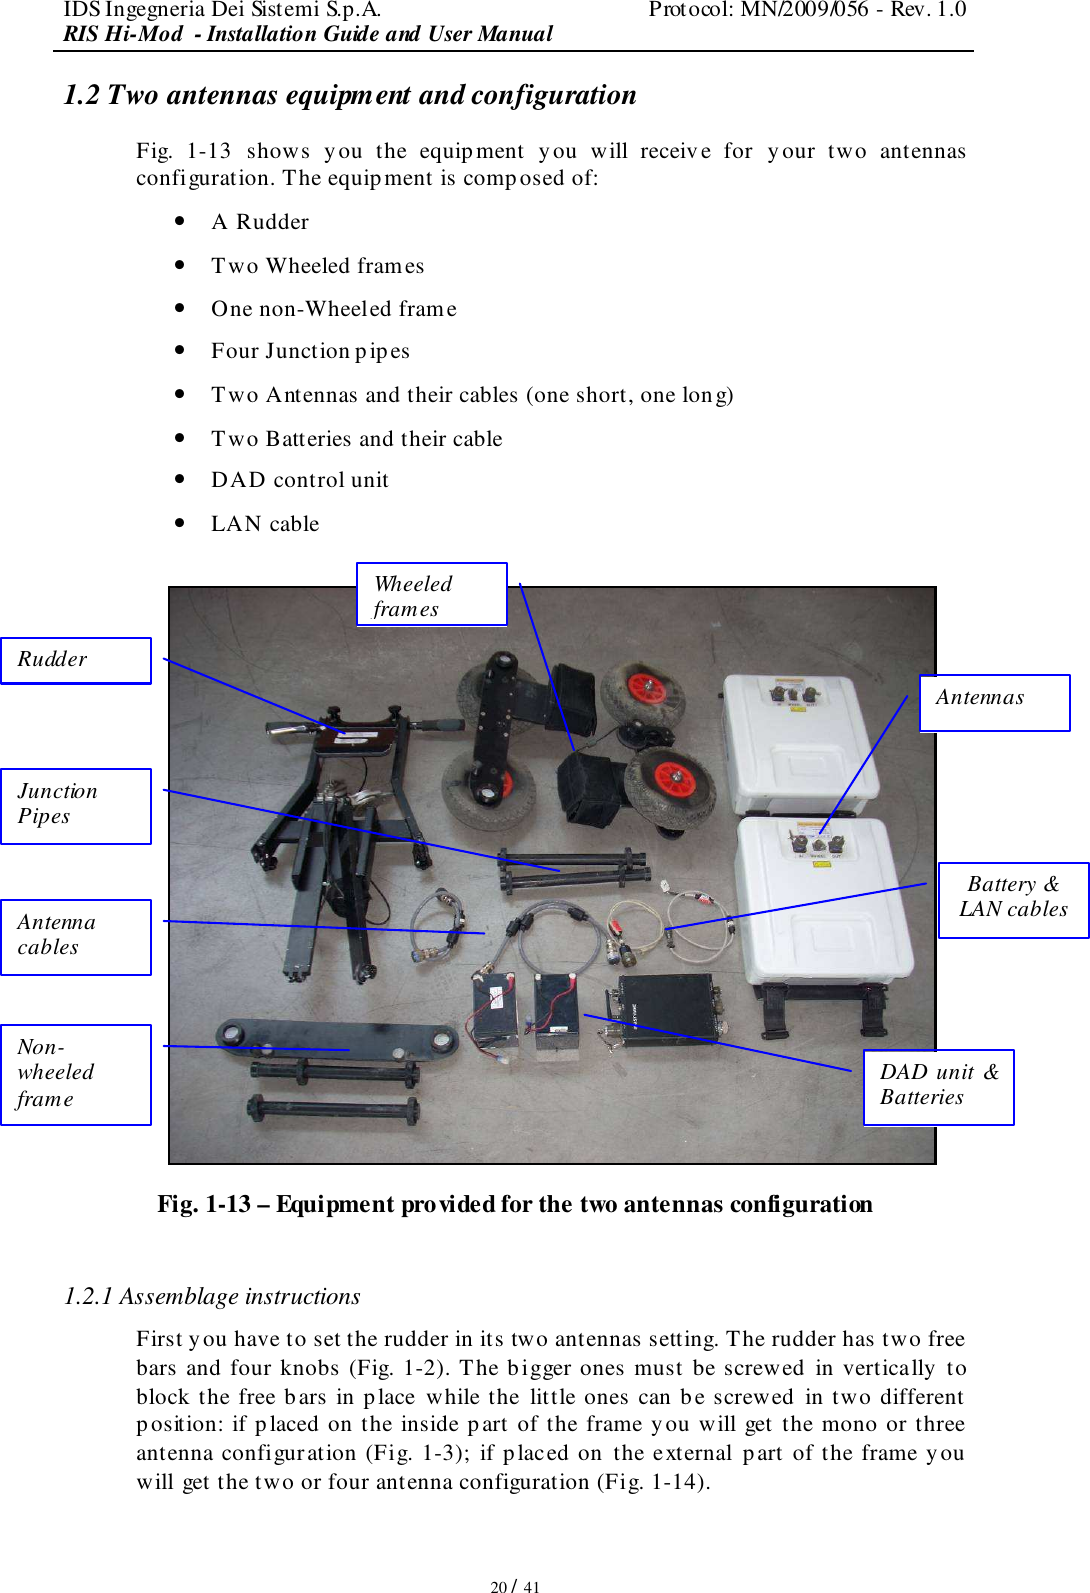 IDS Ingegneria Dei Sistemi S.p.A.  Protocol: MN/2009/056 - Rev. 1.0 RIS Hi-Mod  - Installation Guide and User Manual   20 / 41 1.2 Two antennas equipment and configuration Fig.  1-13  shows  you  the  equipment  y ou  will  receive  for  y our  two  antennas configuration. The equipment is composed of: • A Rudder • Two Wheeled frames • One non-Wheeled frame • Four Junction pipes • Two Antennas and their cables (one short, one long) • Two Batteries and their cable • DAD control unit  • LAN cable   Fig. 1-13 – Equipment provided for the two antennas configuration  1.2.1 Assemblage instructions First you have to set the rudder in its two antennas setting. The rudder has two free bars and four knobs (Fig. 1-2). The b igger ones must be screwed  in vertically to block the free bars in place while the  little ones can be screwed  in two different  position: if placed on the inside p art of the frame you will get the mono or three antenna configuration (Fig. 1-3); if placed on the external p art of the frame you  will get the two or four antenna configuration (Fig. 1-14). Rudder Wheeled frames Antennas Junction Pipes Non-wheeled frame DAD unit &amp; Batteries Battery &amp; LAN cables Antenna cables 